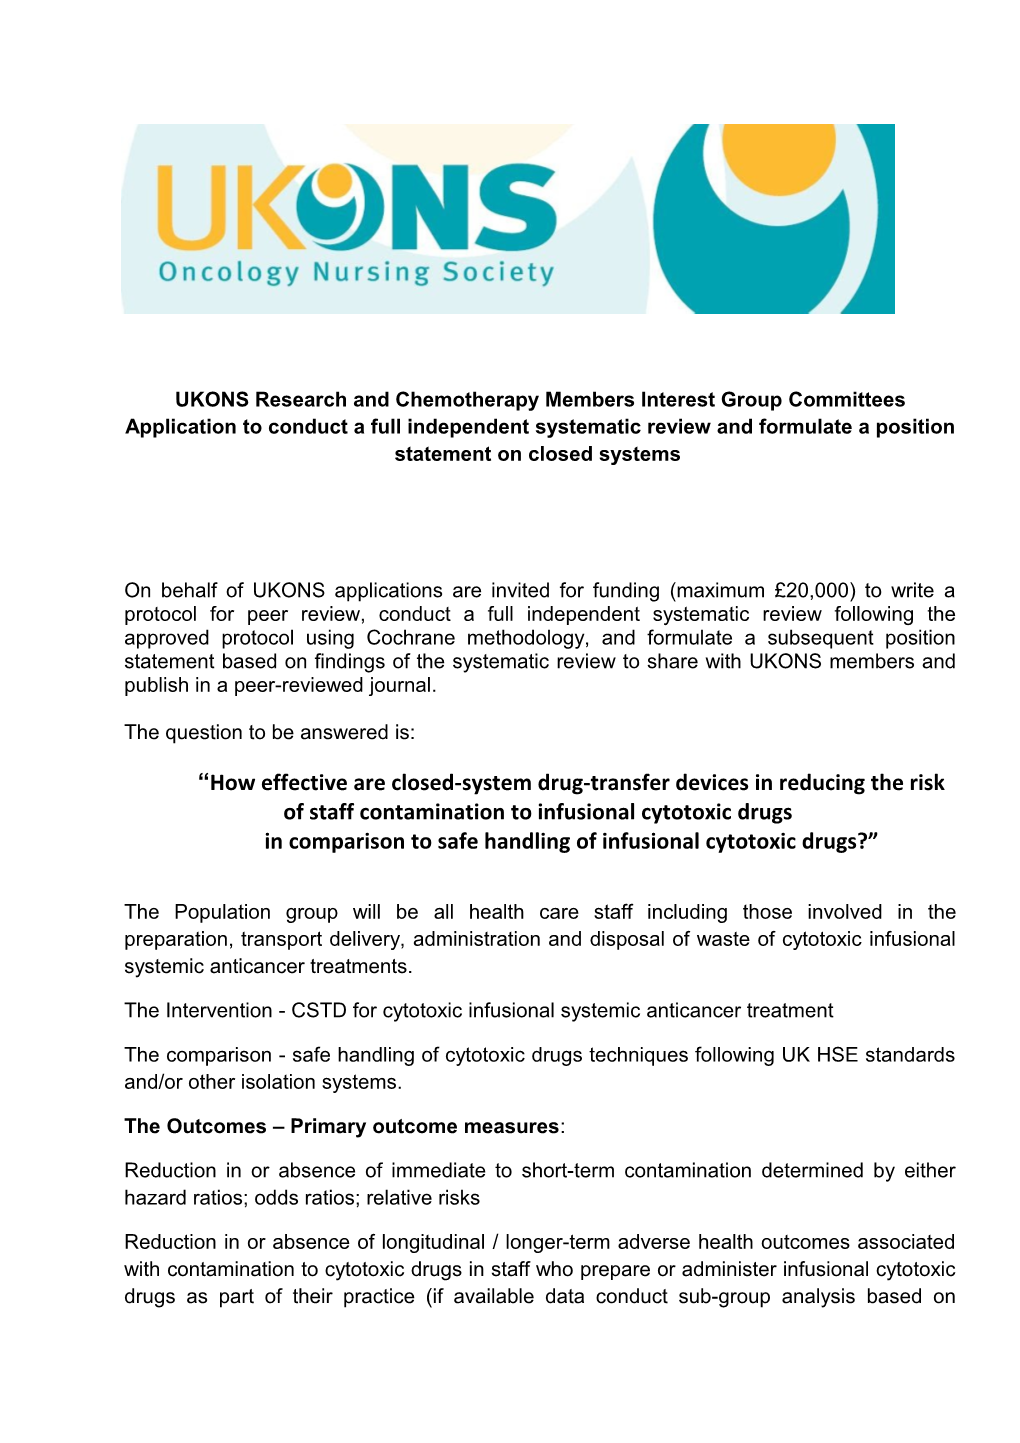 UKONS Research and Chemotherapy Members Interest Group Committees Application to Conduct